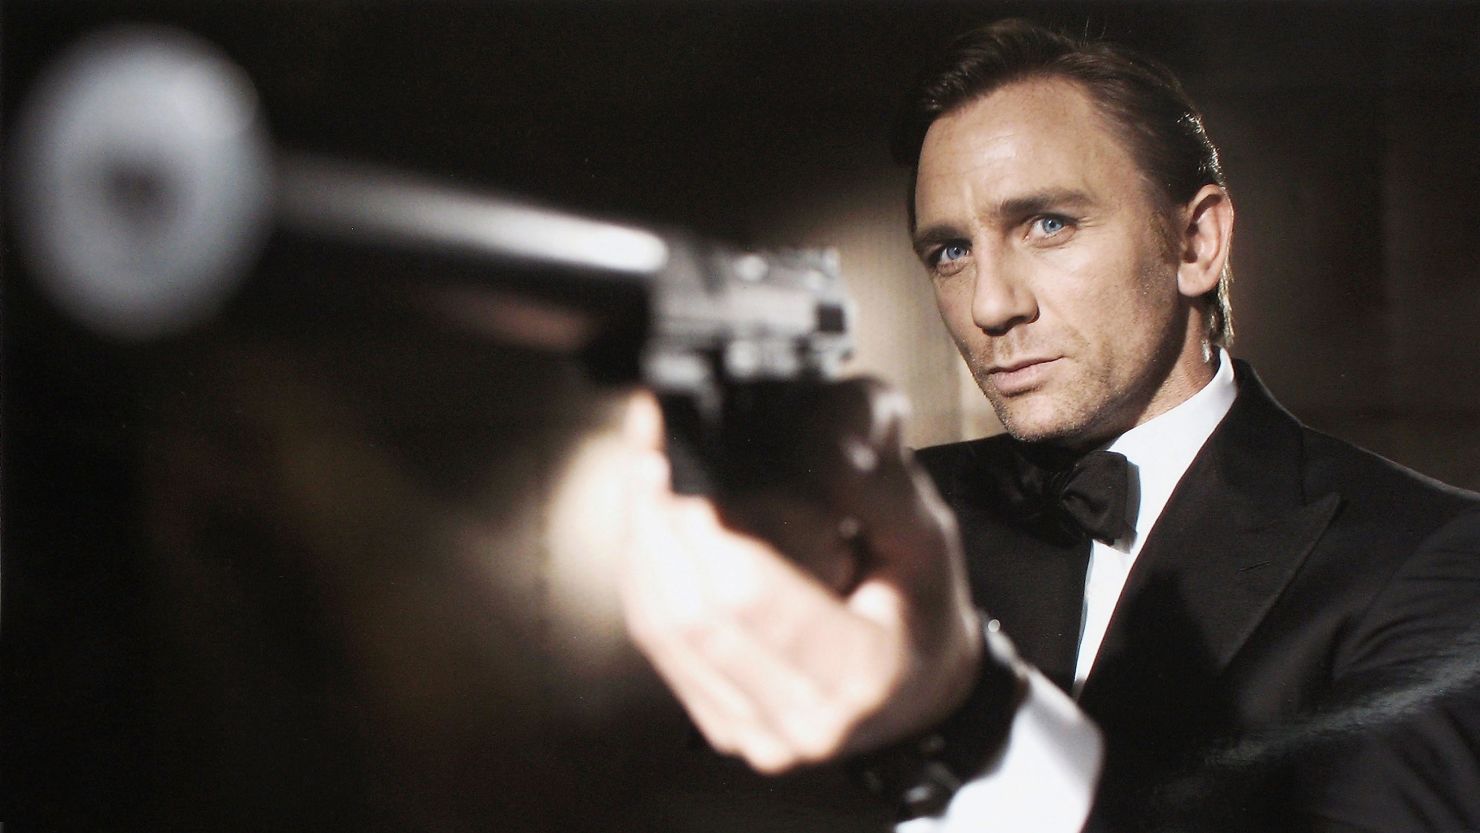 Playing James Bond is reportedly paying off for Daniel Craig.